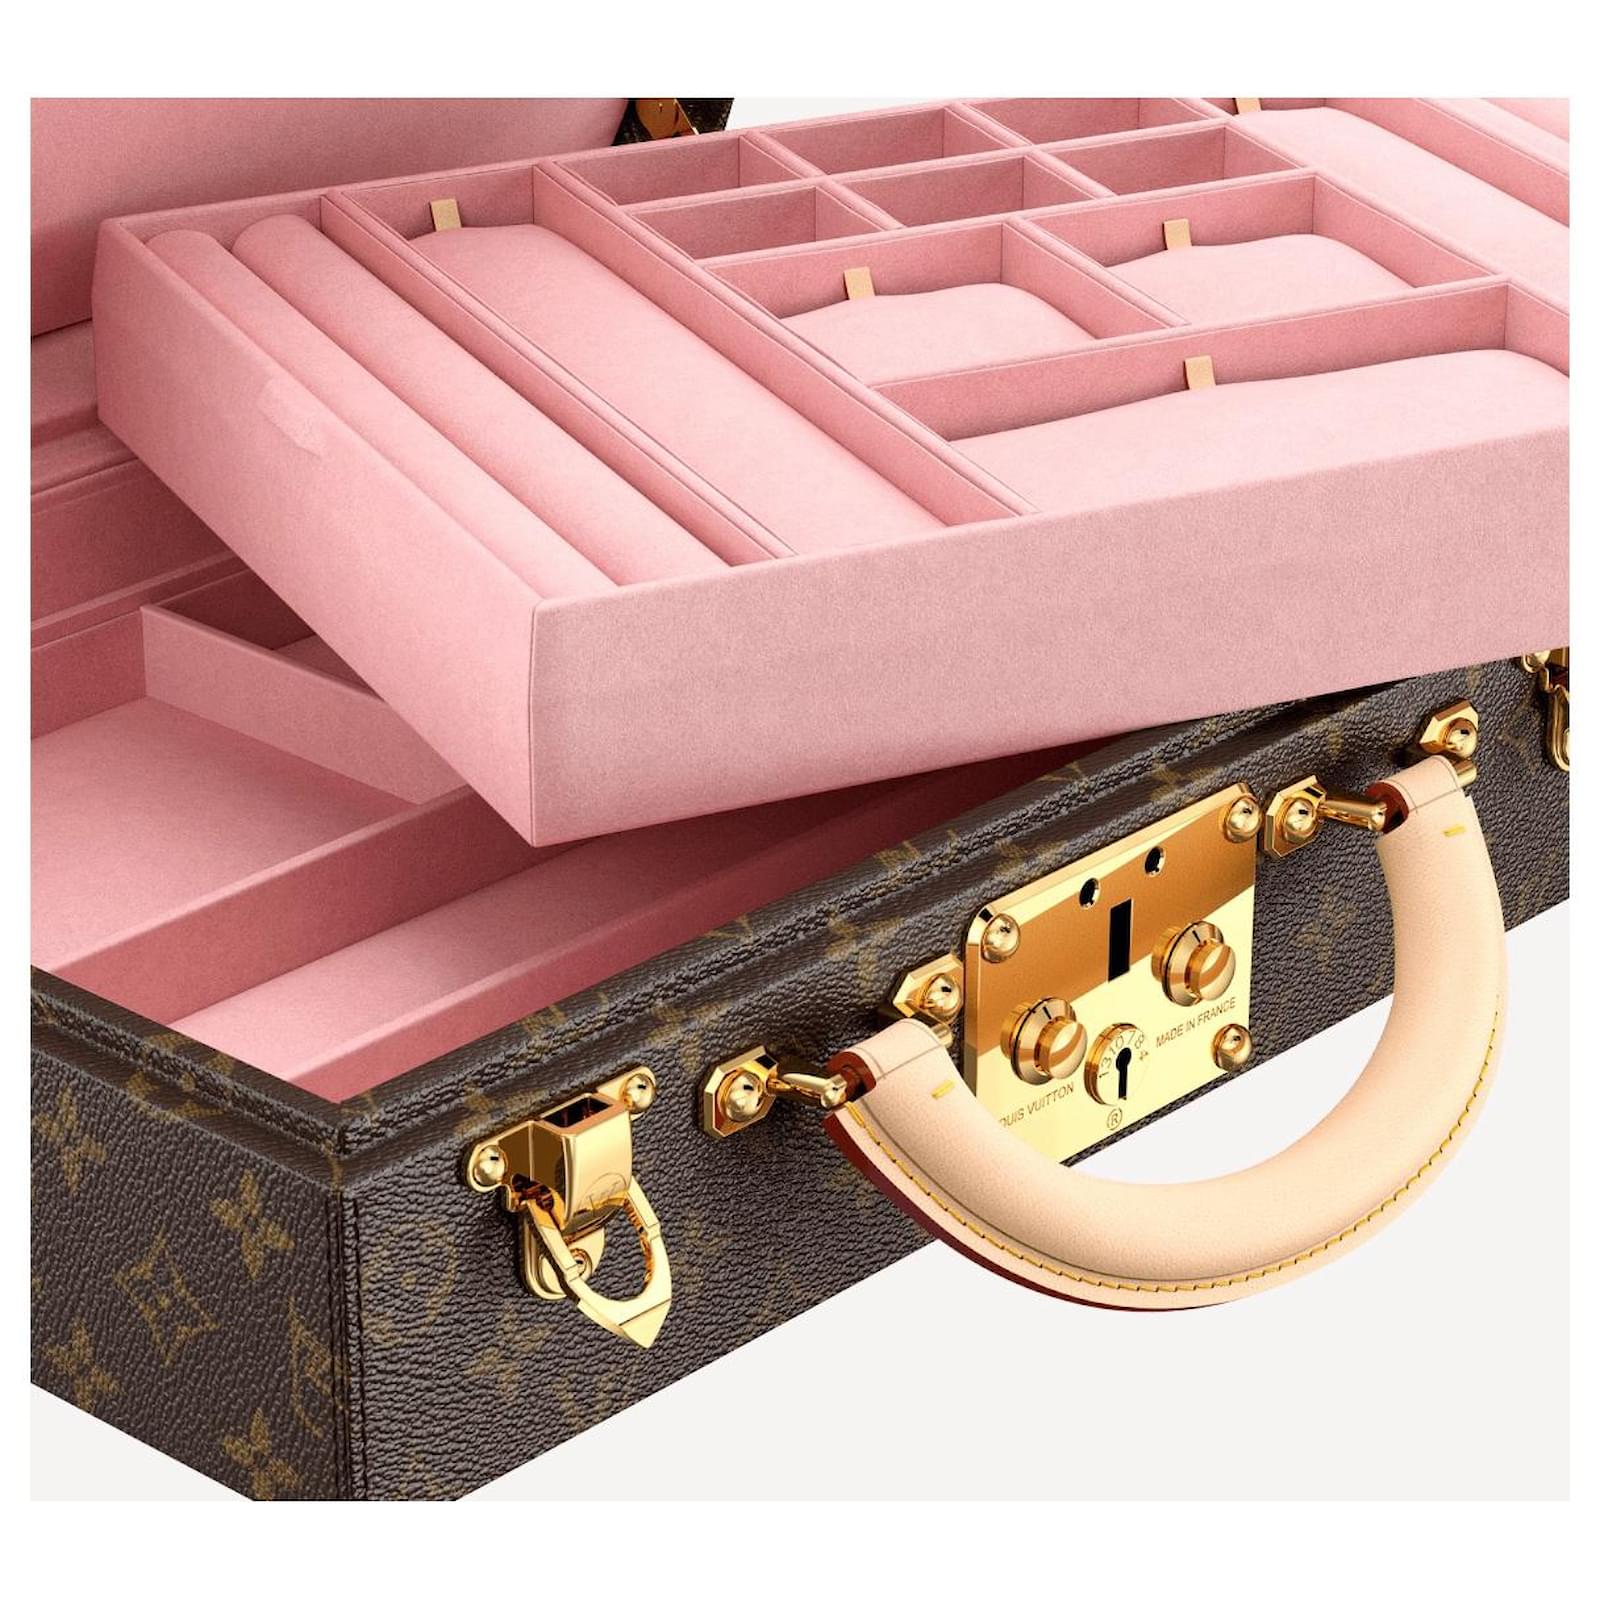 2020 Louis Vuitton Vivienne music/jewelry box in pink - Pinth Vintage  Luggage